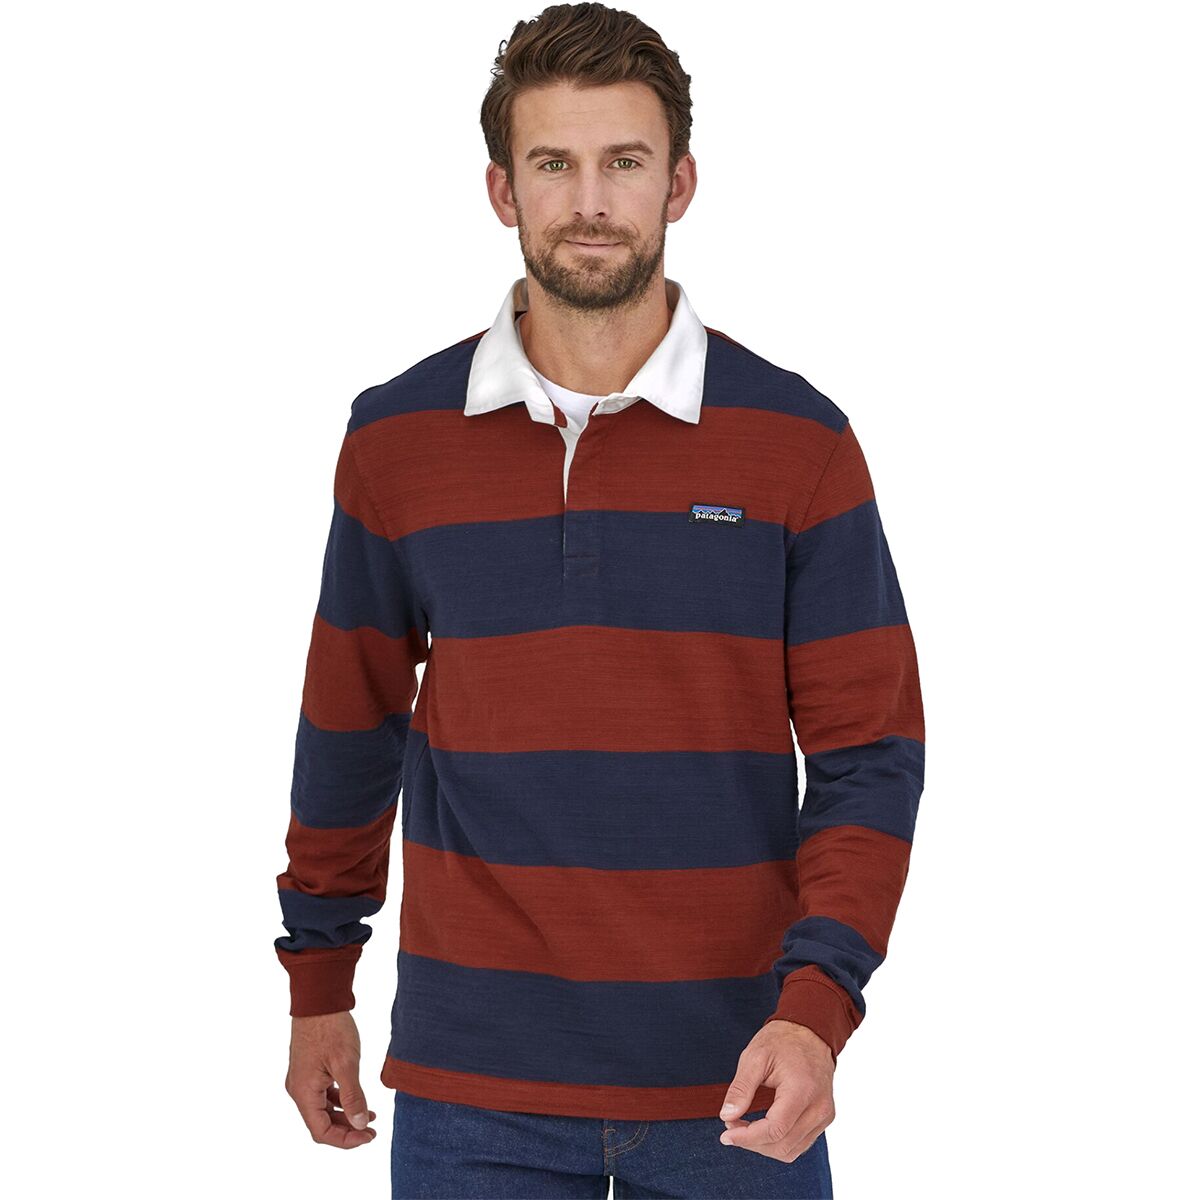 Patagonia Rugby Long-Sleeve Shirt - Men's - Clothing